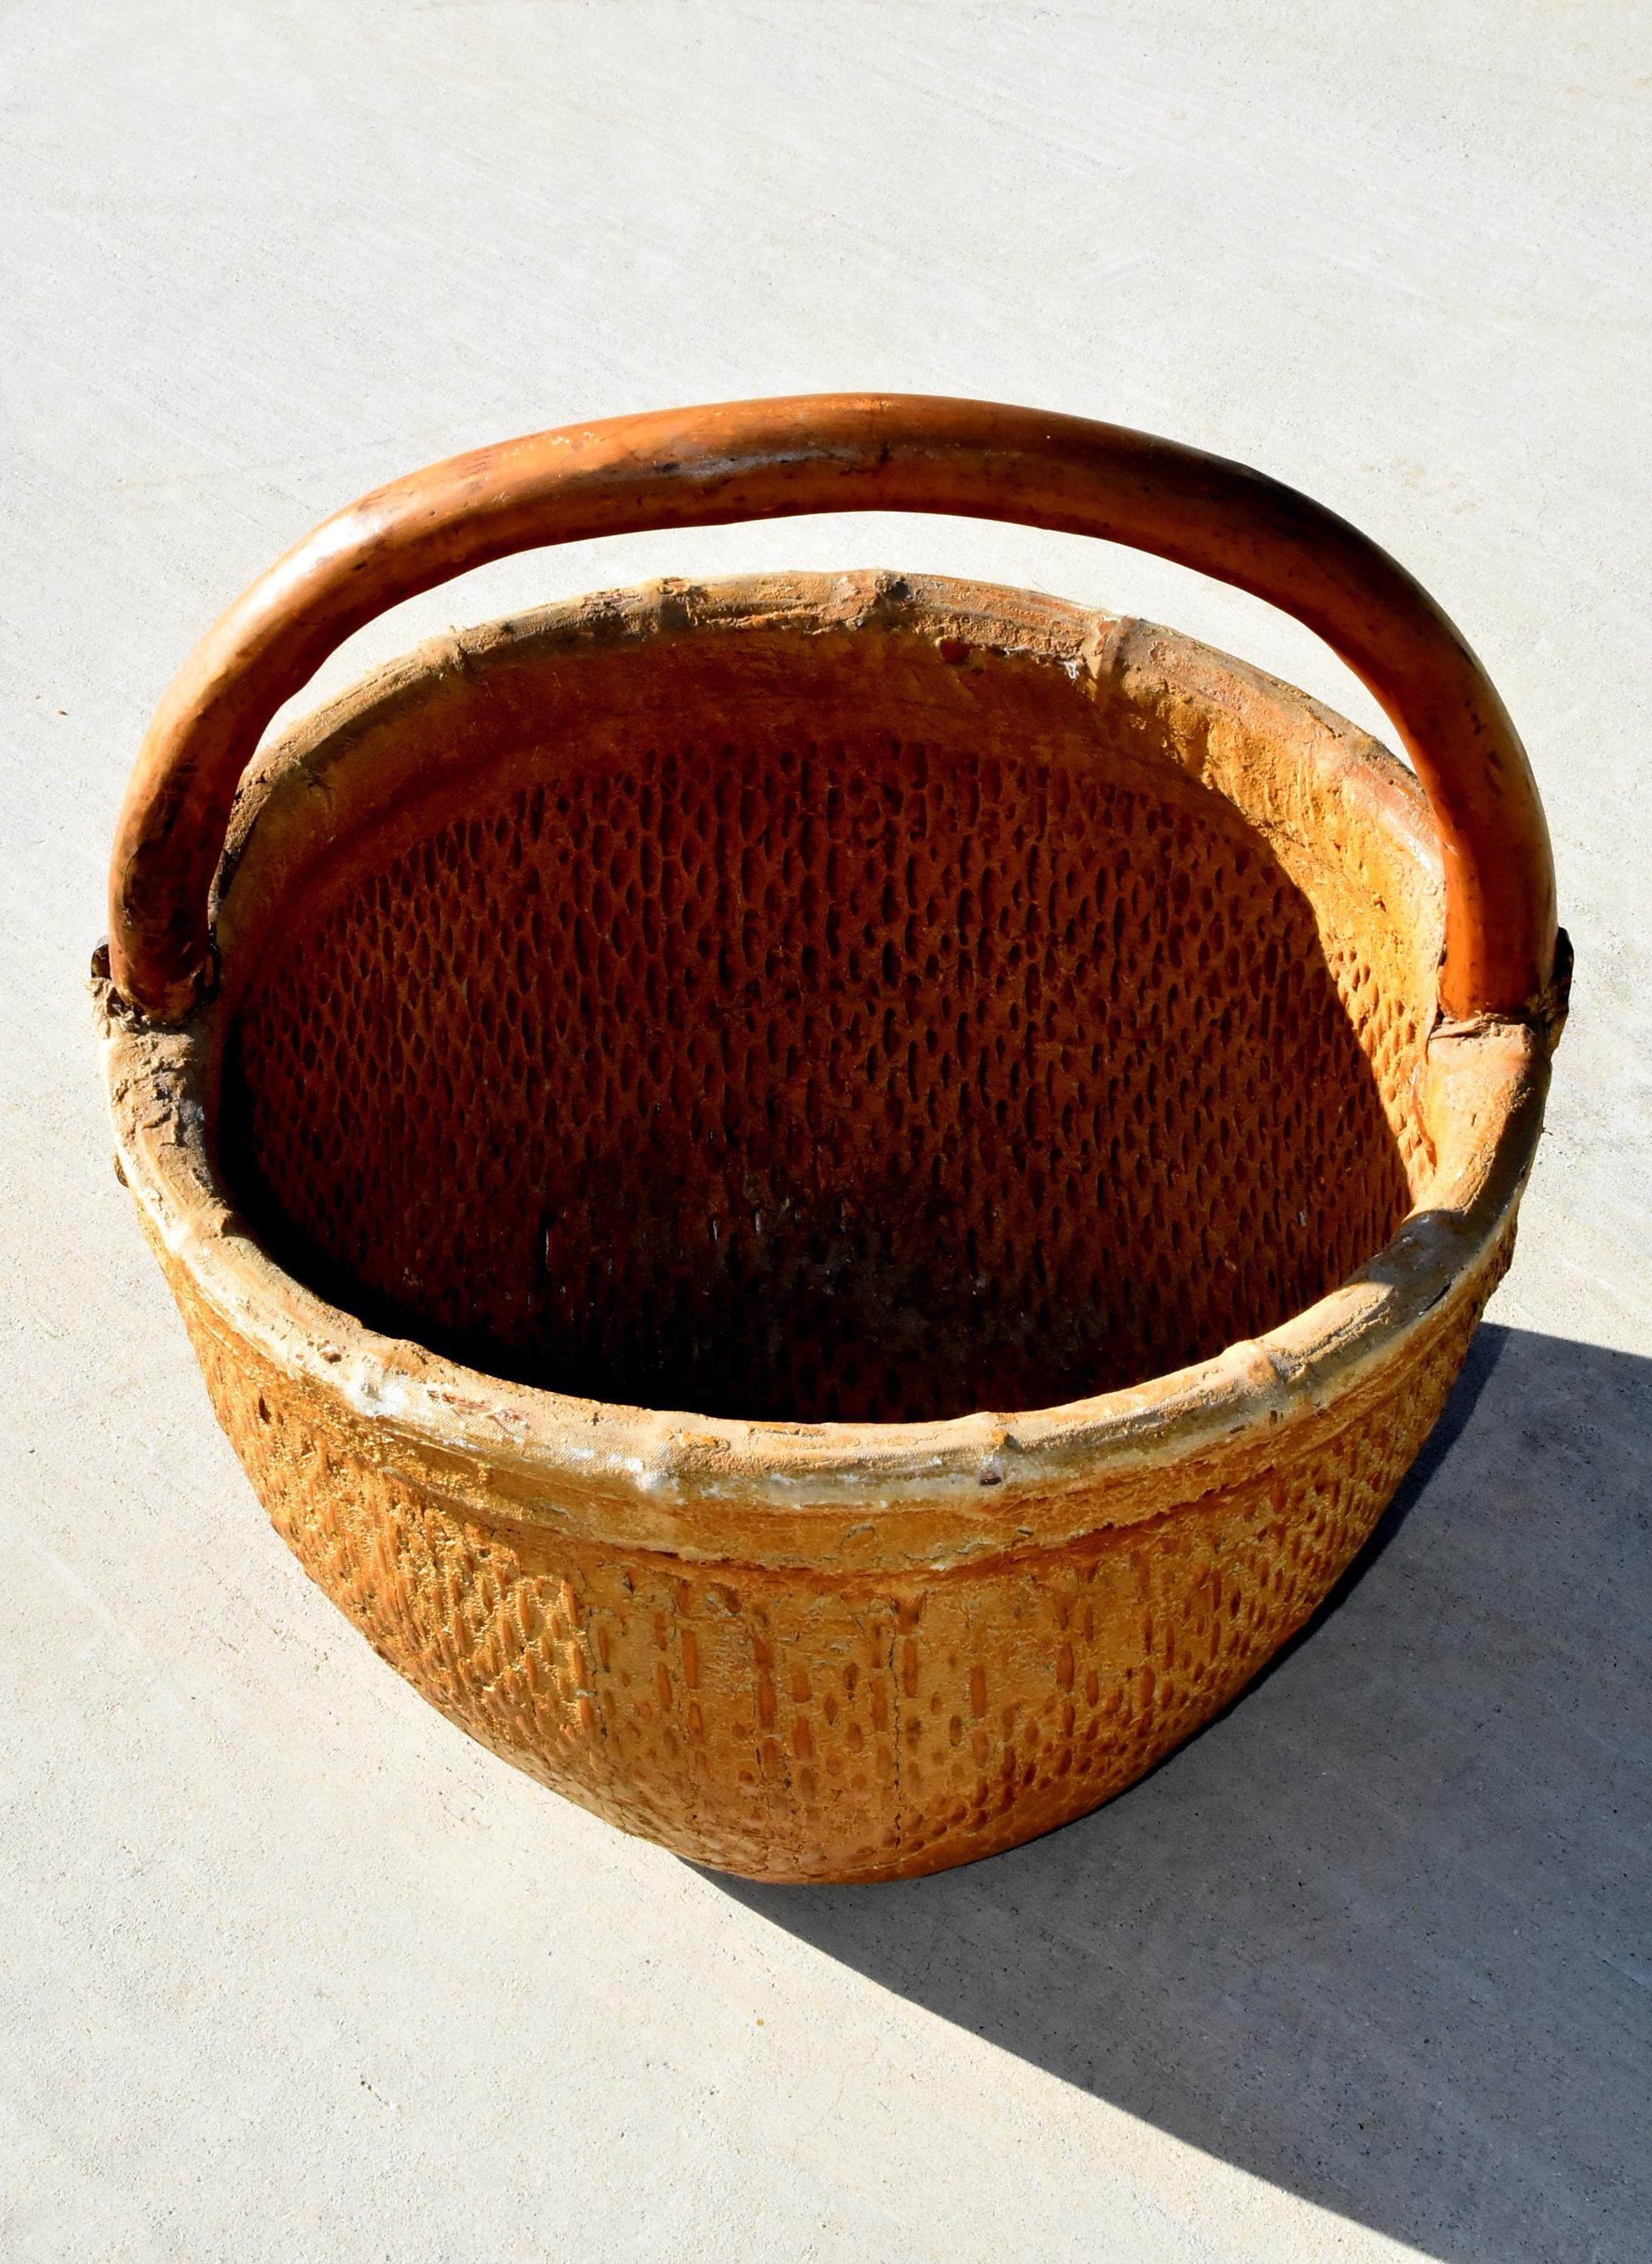 A wonderful antique basket with a tree branch handle and iron bracket enforcement. The willow basket is tightly woven and sealed in clay and fabric. This is a large basket that can be used for many purposes. Great organic, country charm. Handmade.